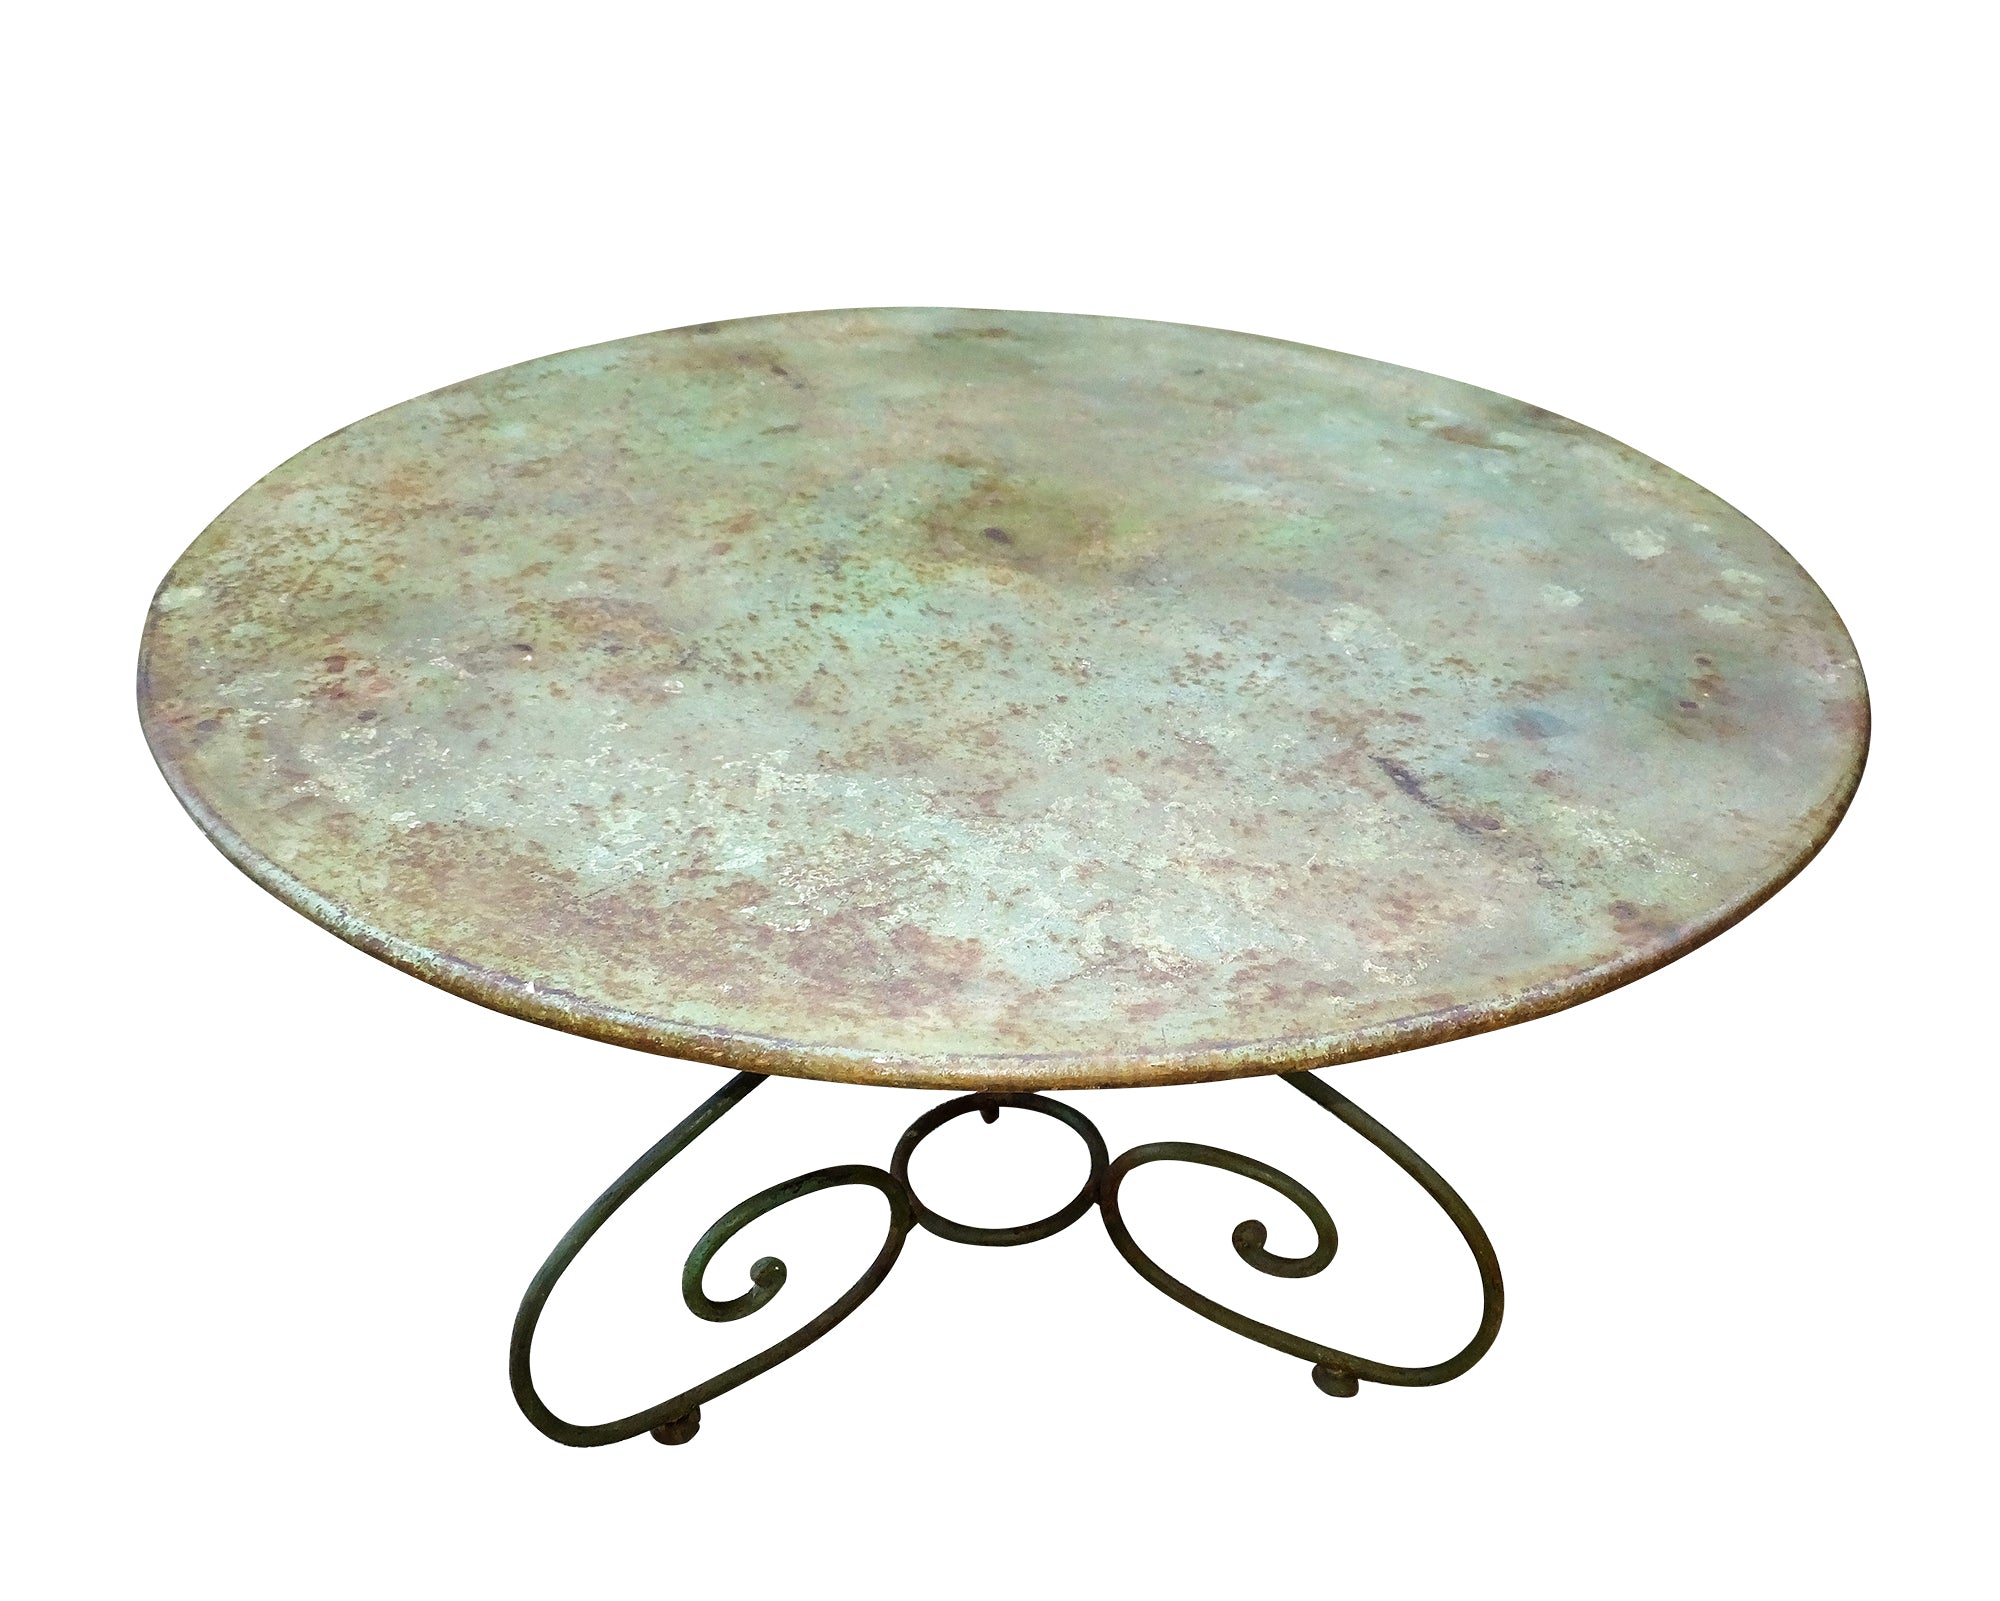 LARGE FRENCH GARDEN TABLE